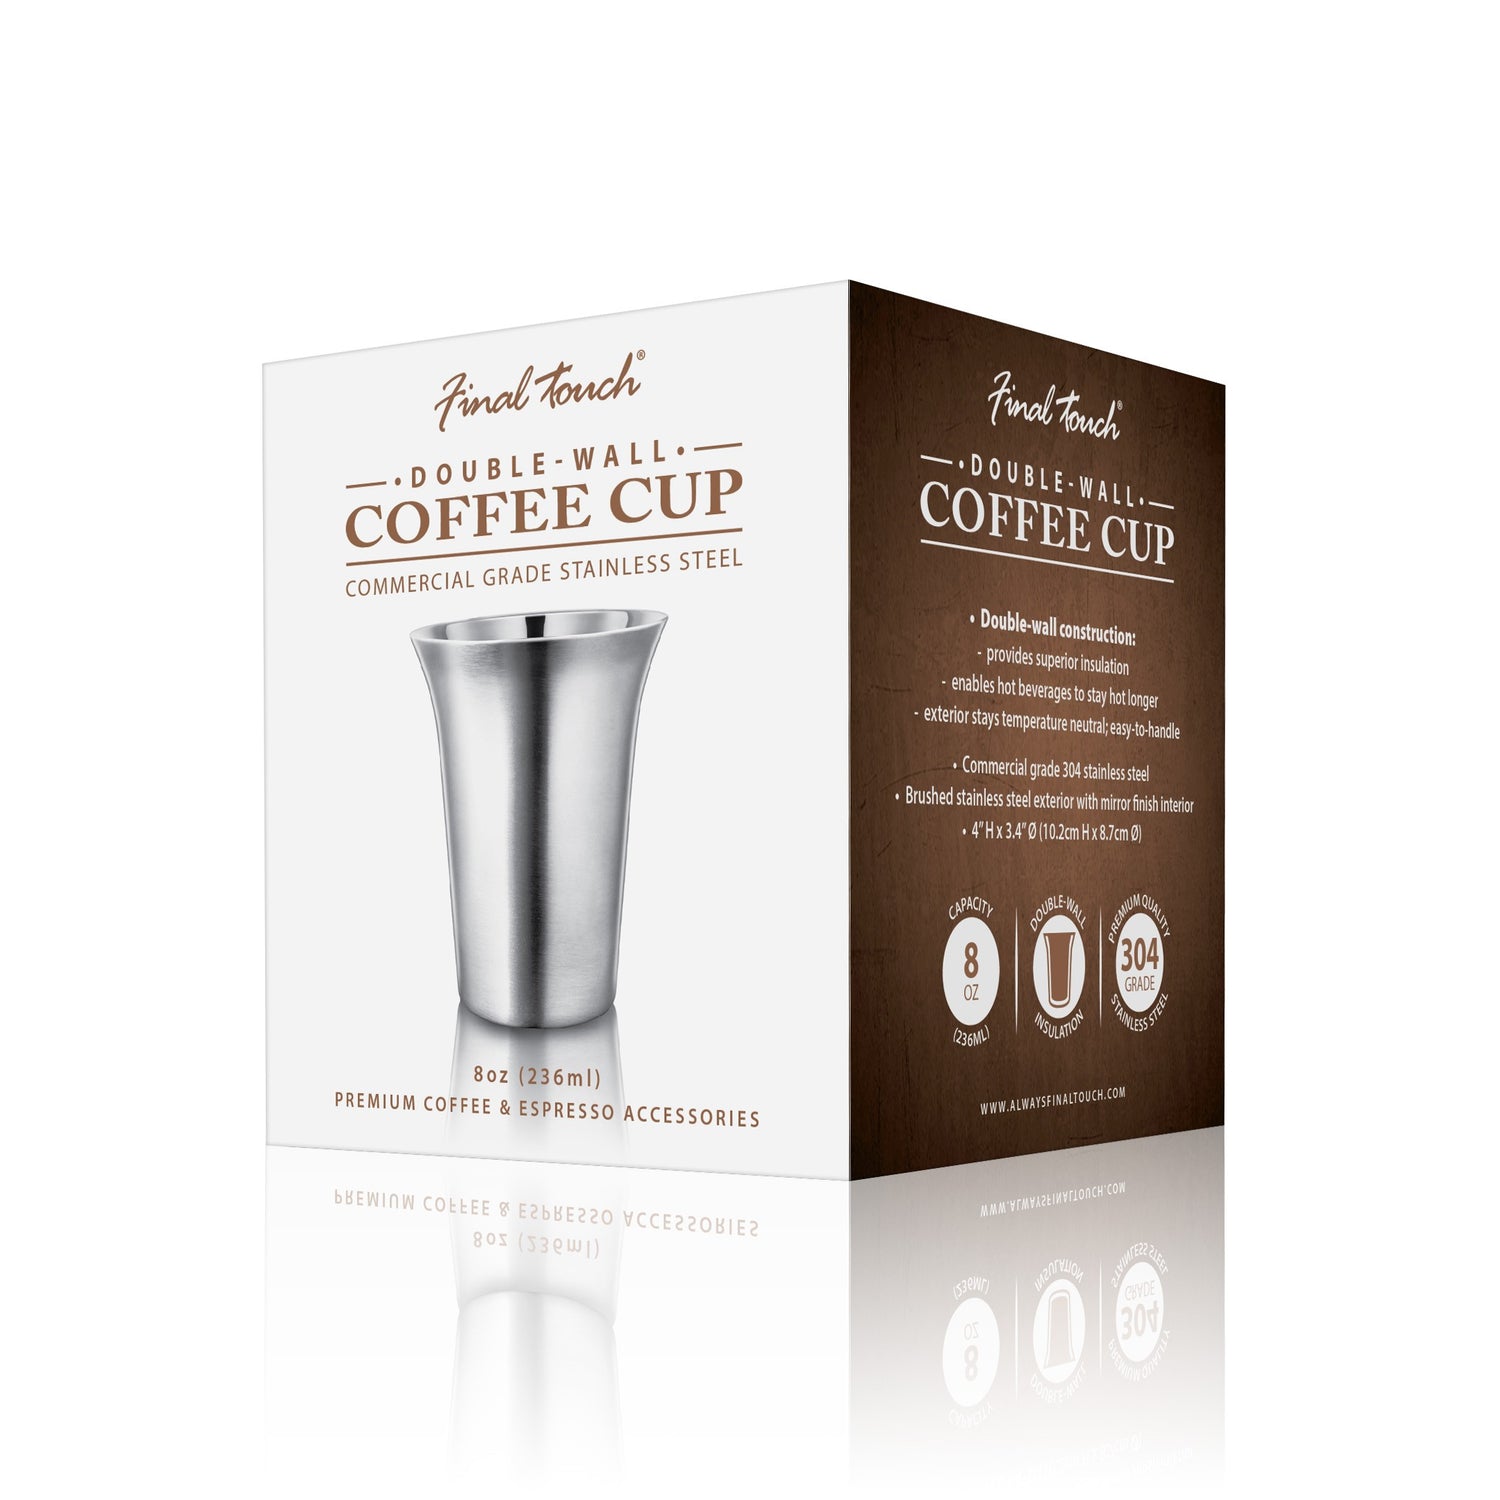 8 oz Double-Wall Coffee Cup